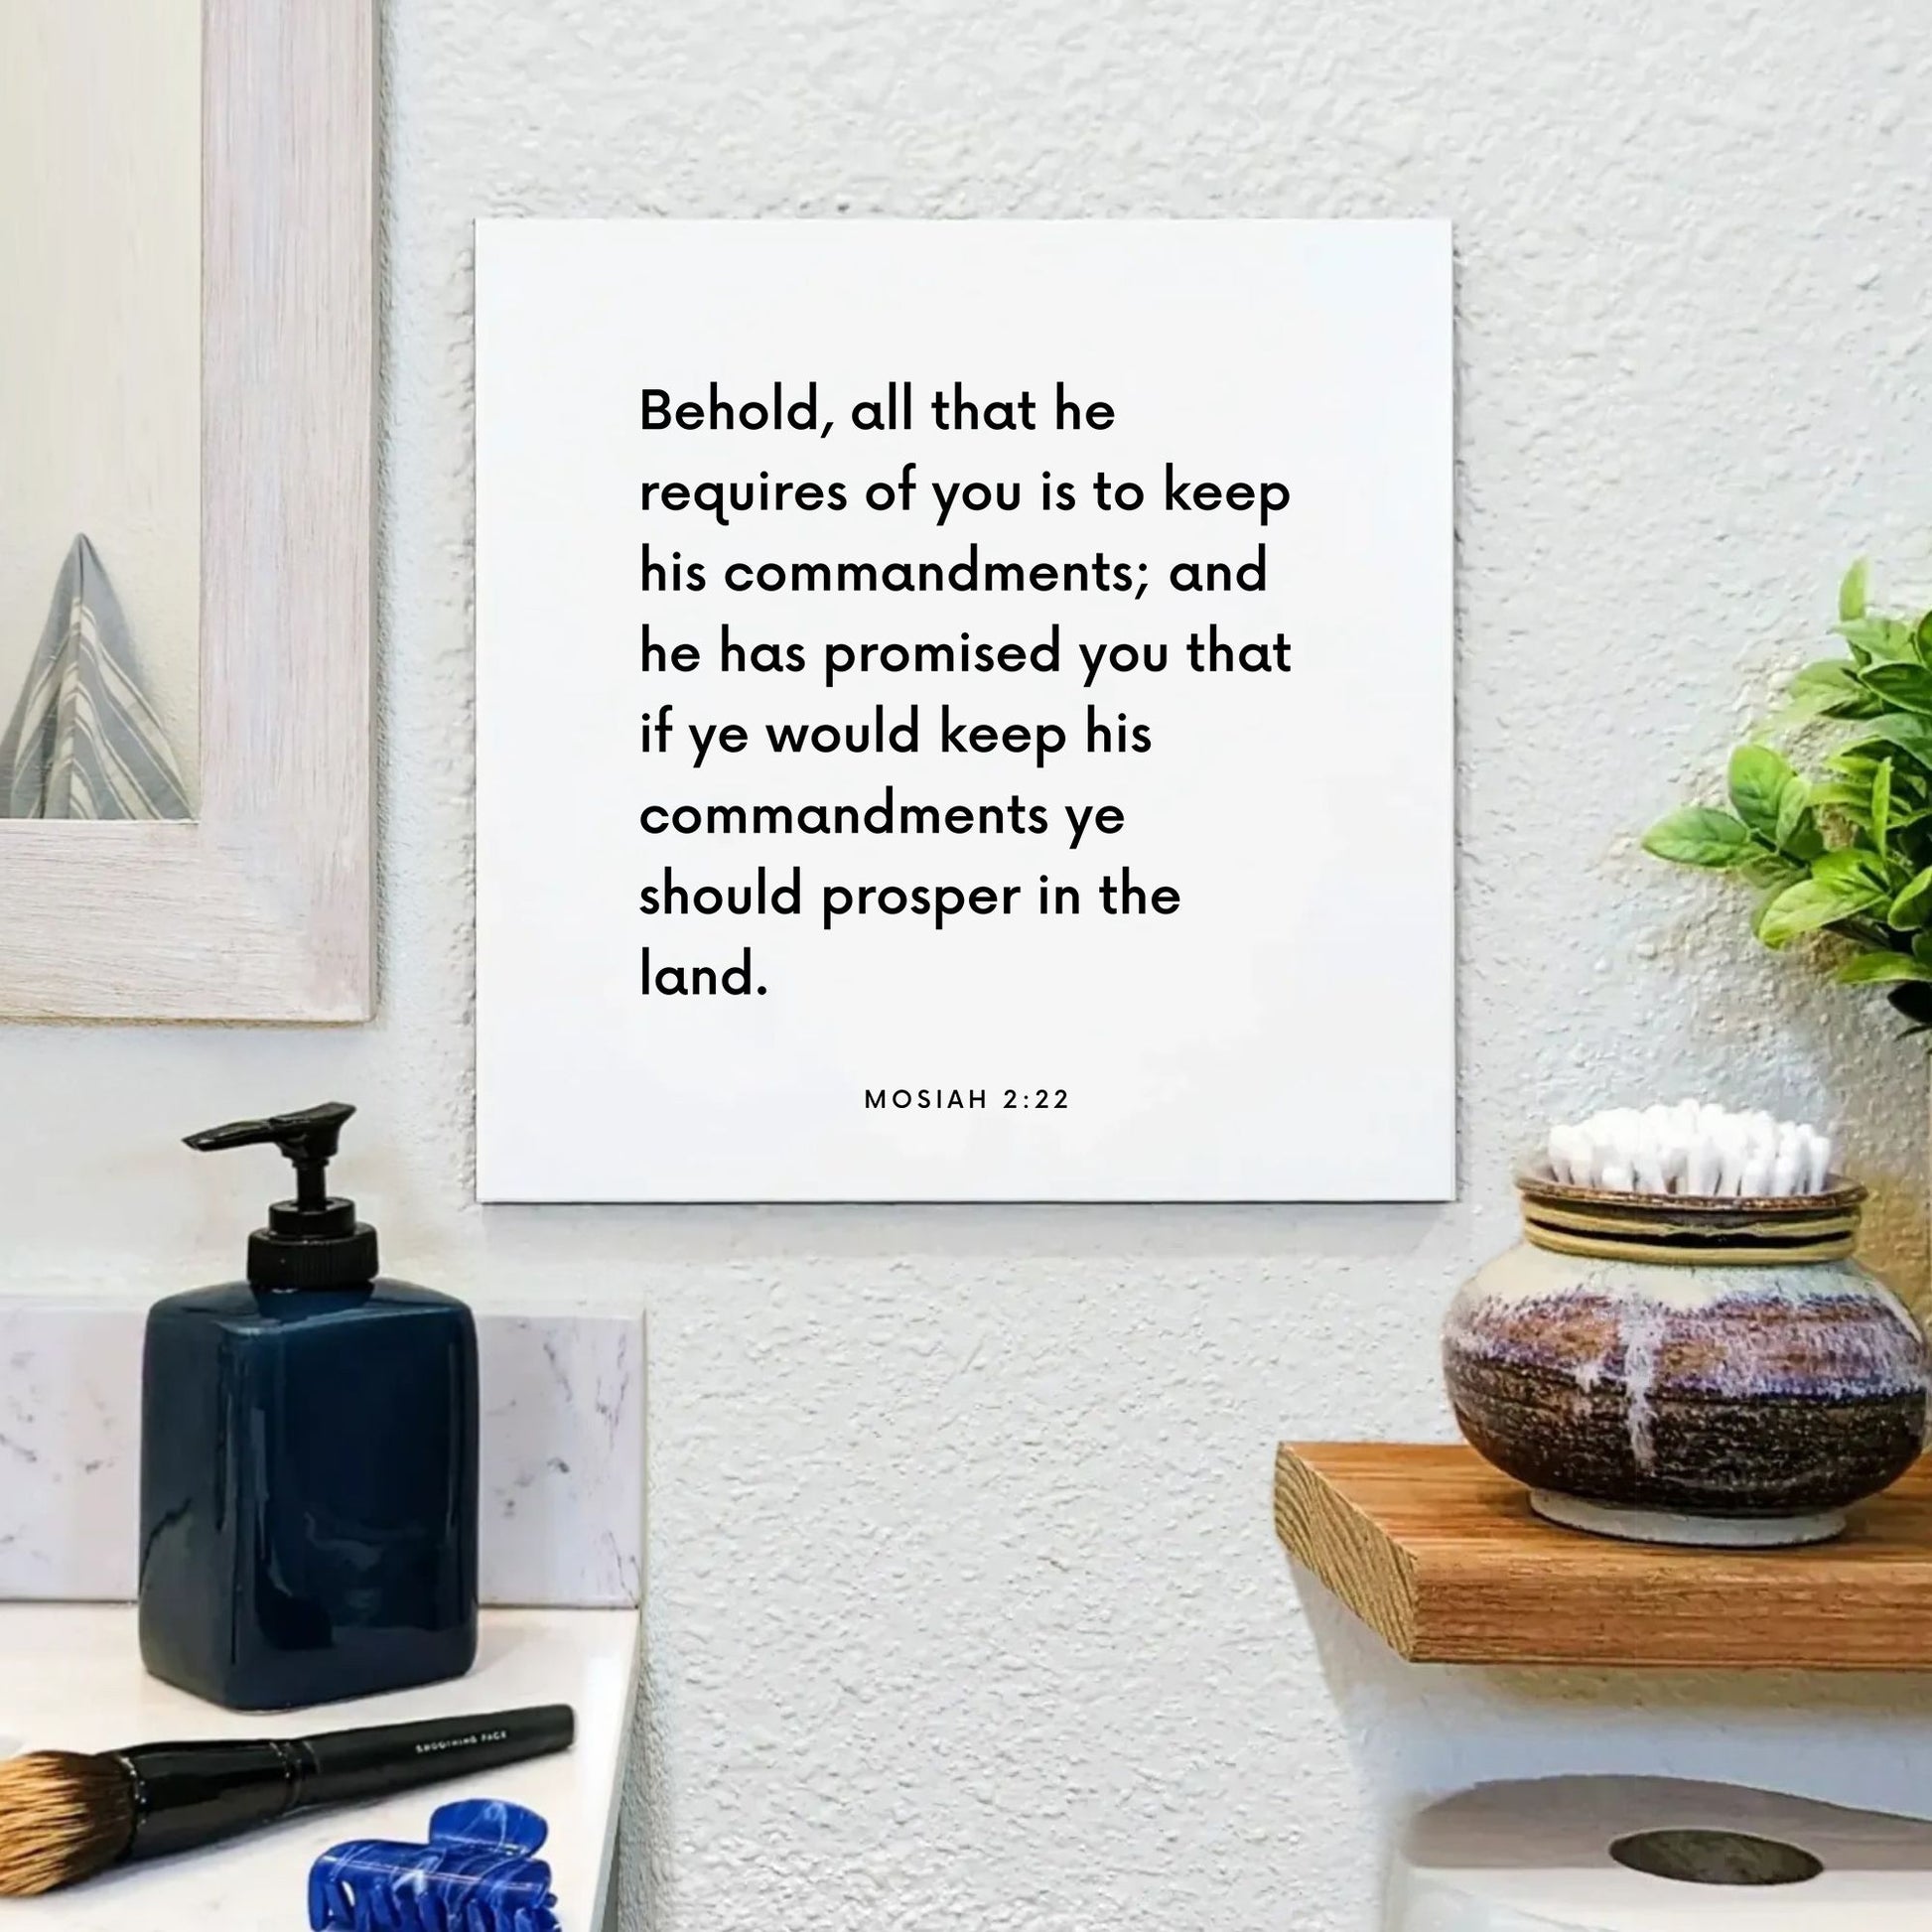 Bathroom mouting of the scripture tile for Mosiah 2:22 - "All that he requires of you is to keep his commandments"